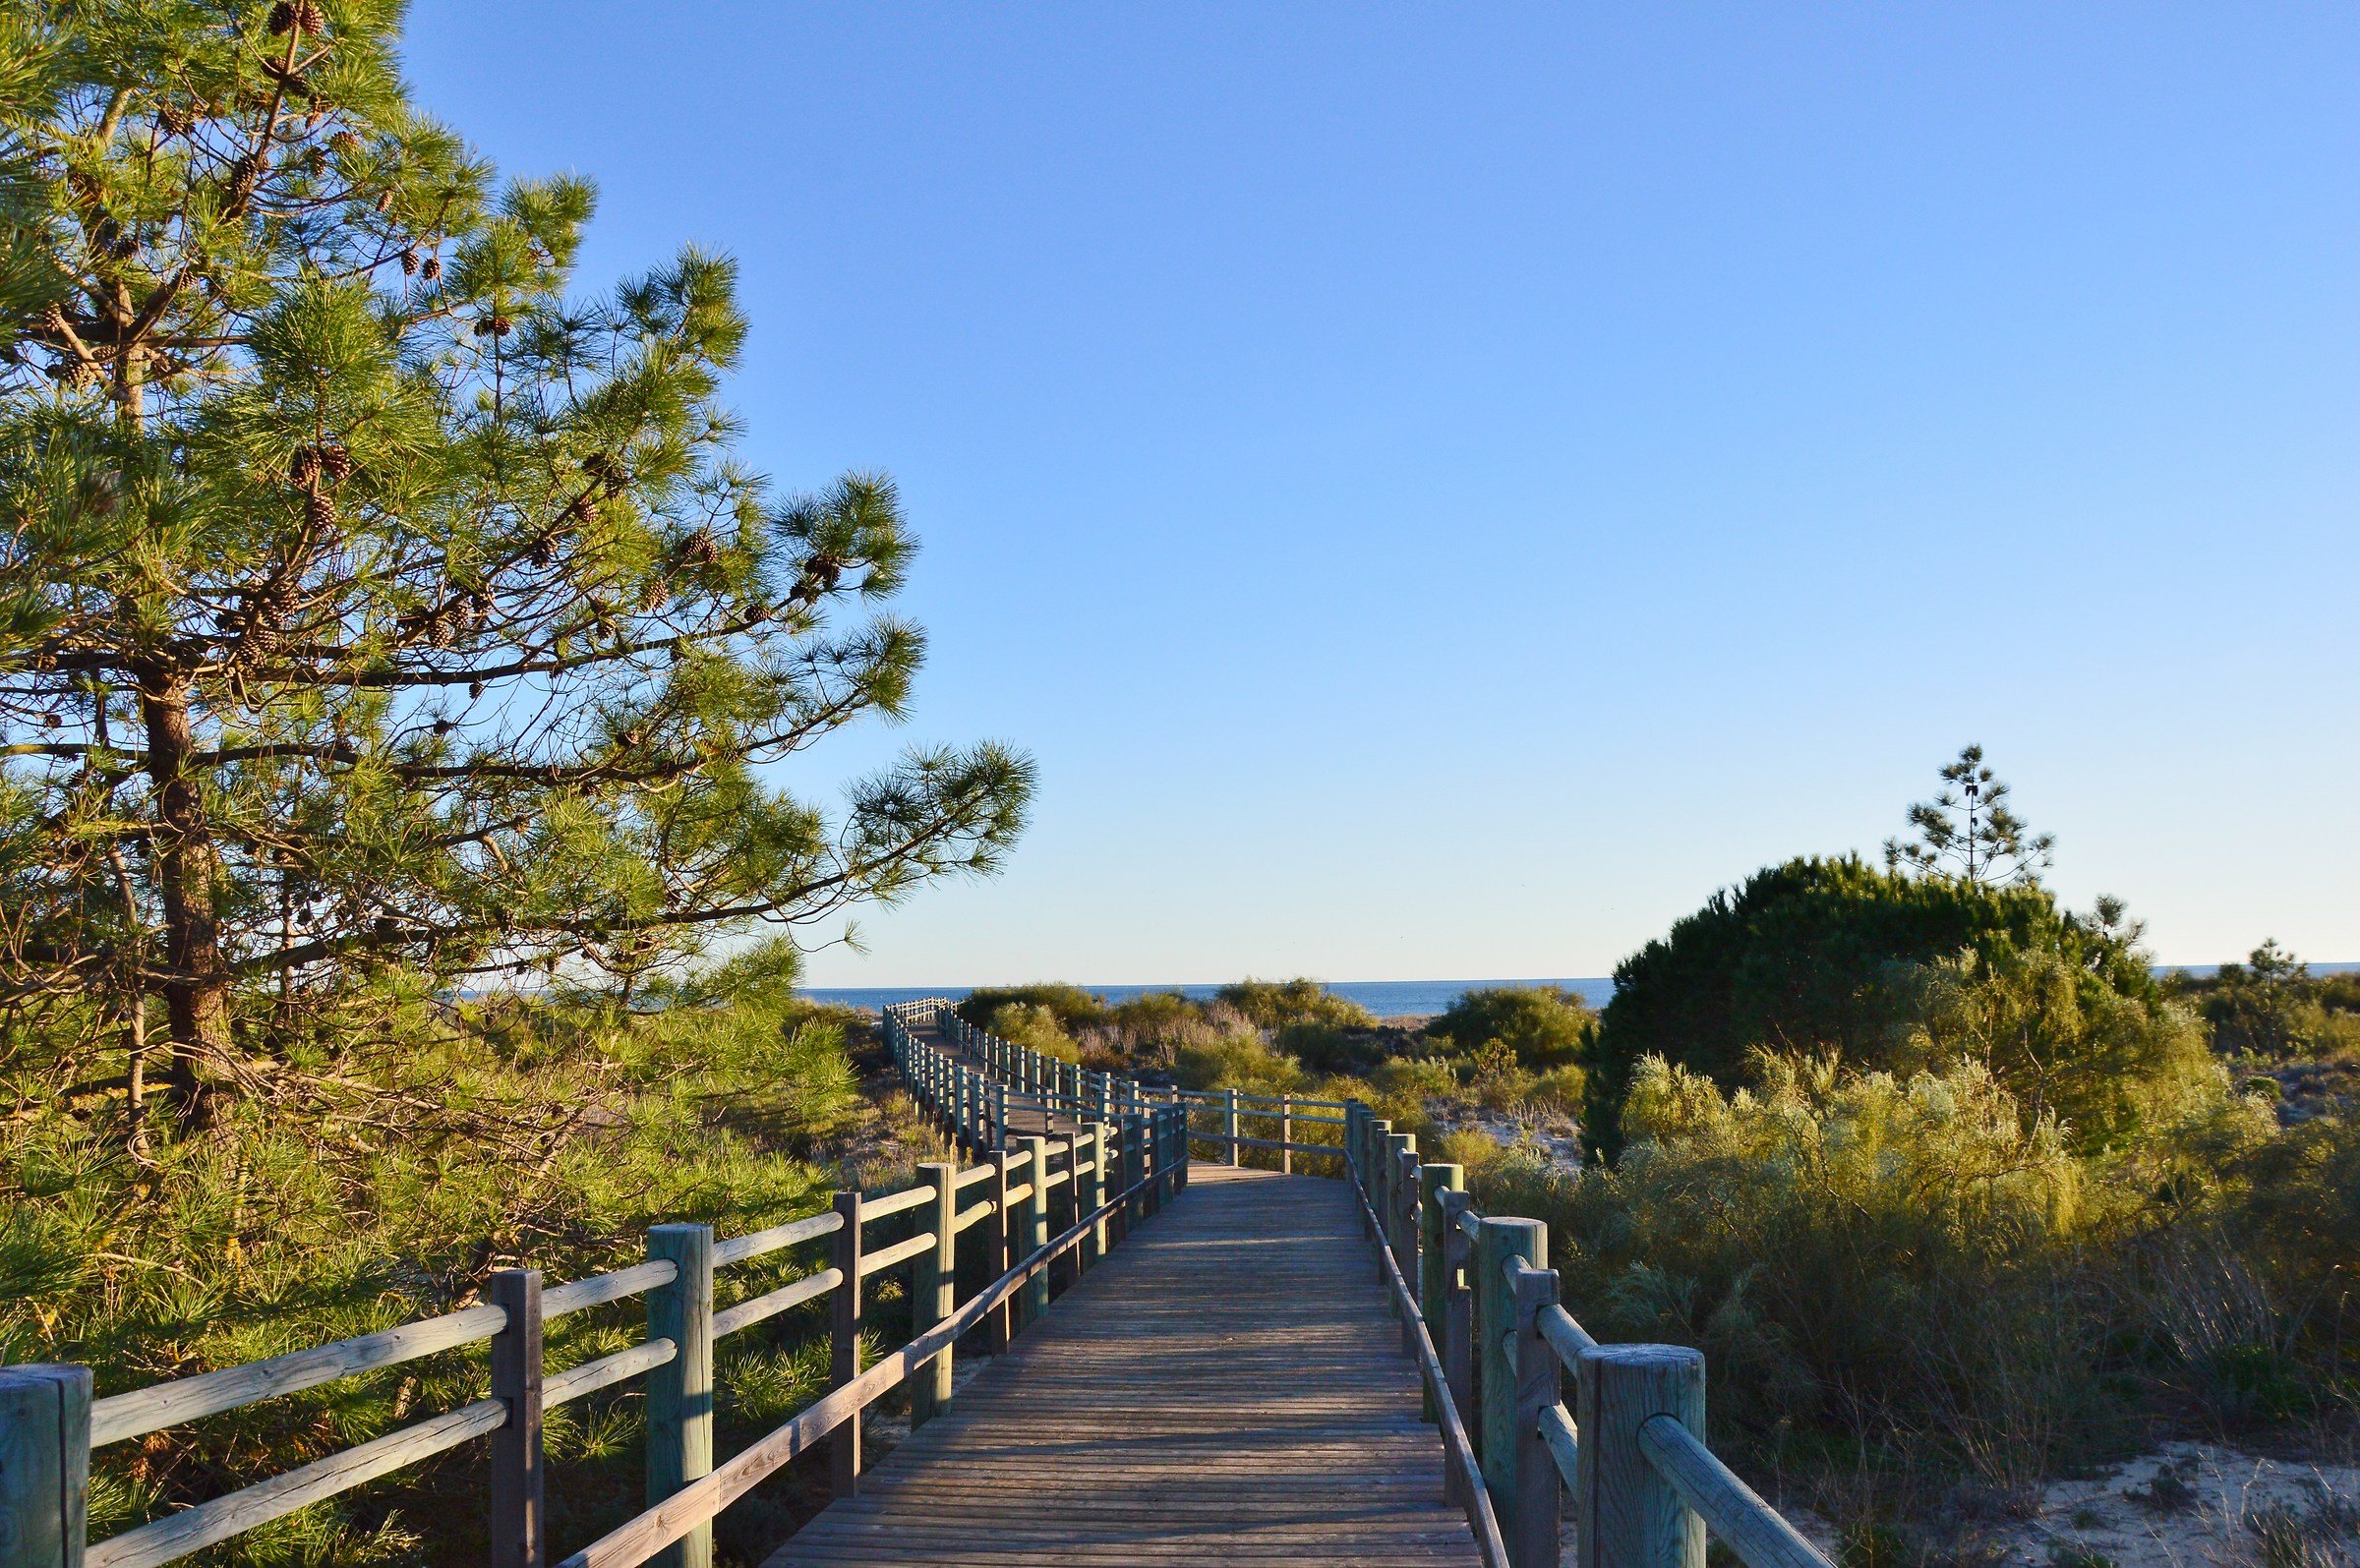 boardwalk over the dunes at the beach of Monte Gordo...